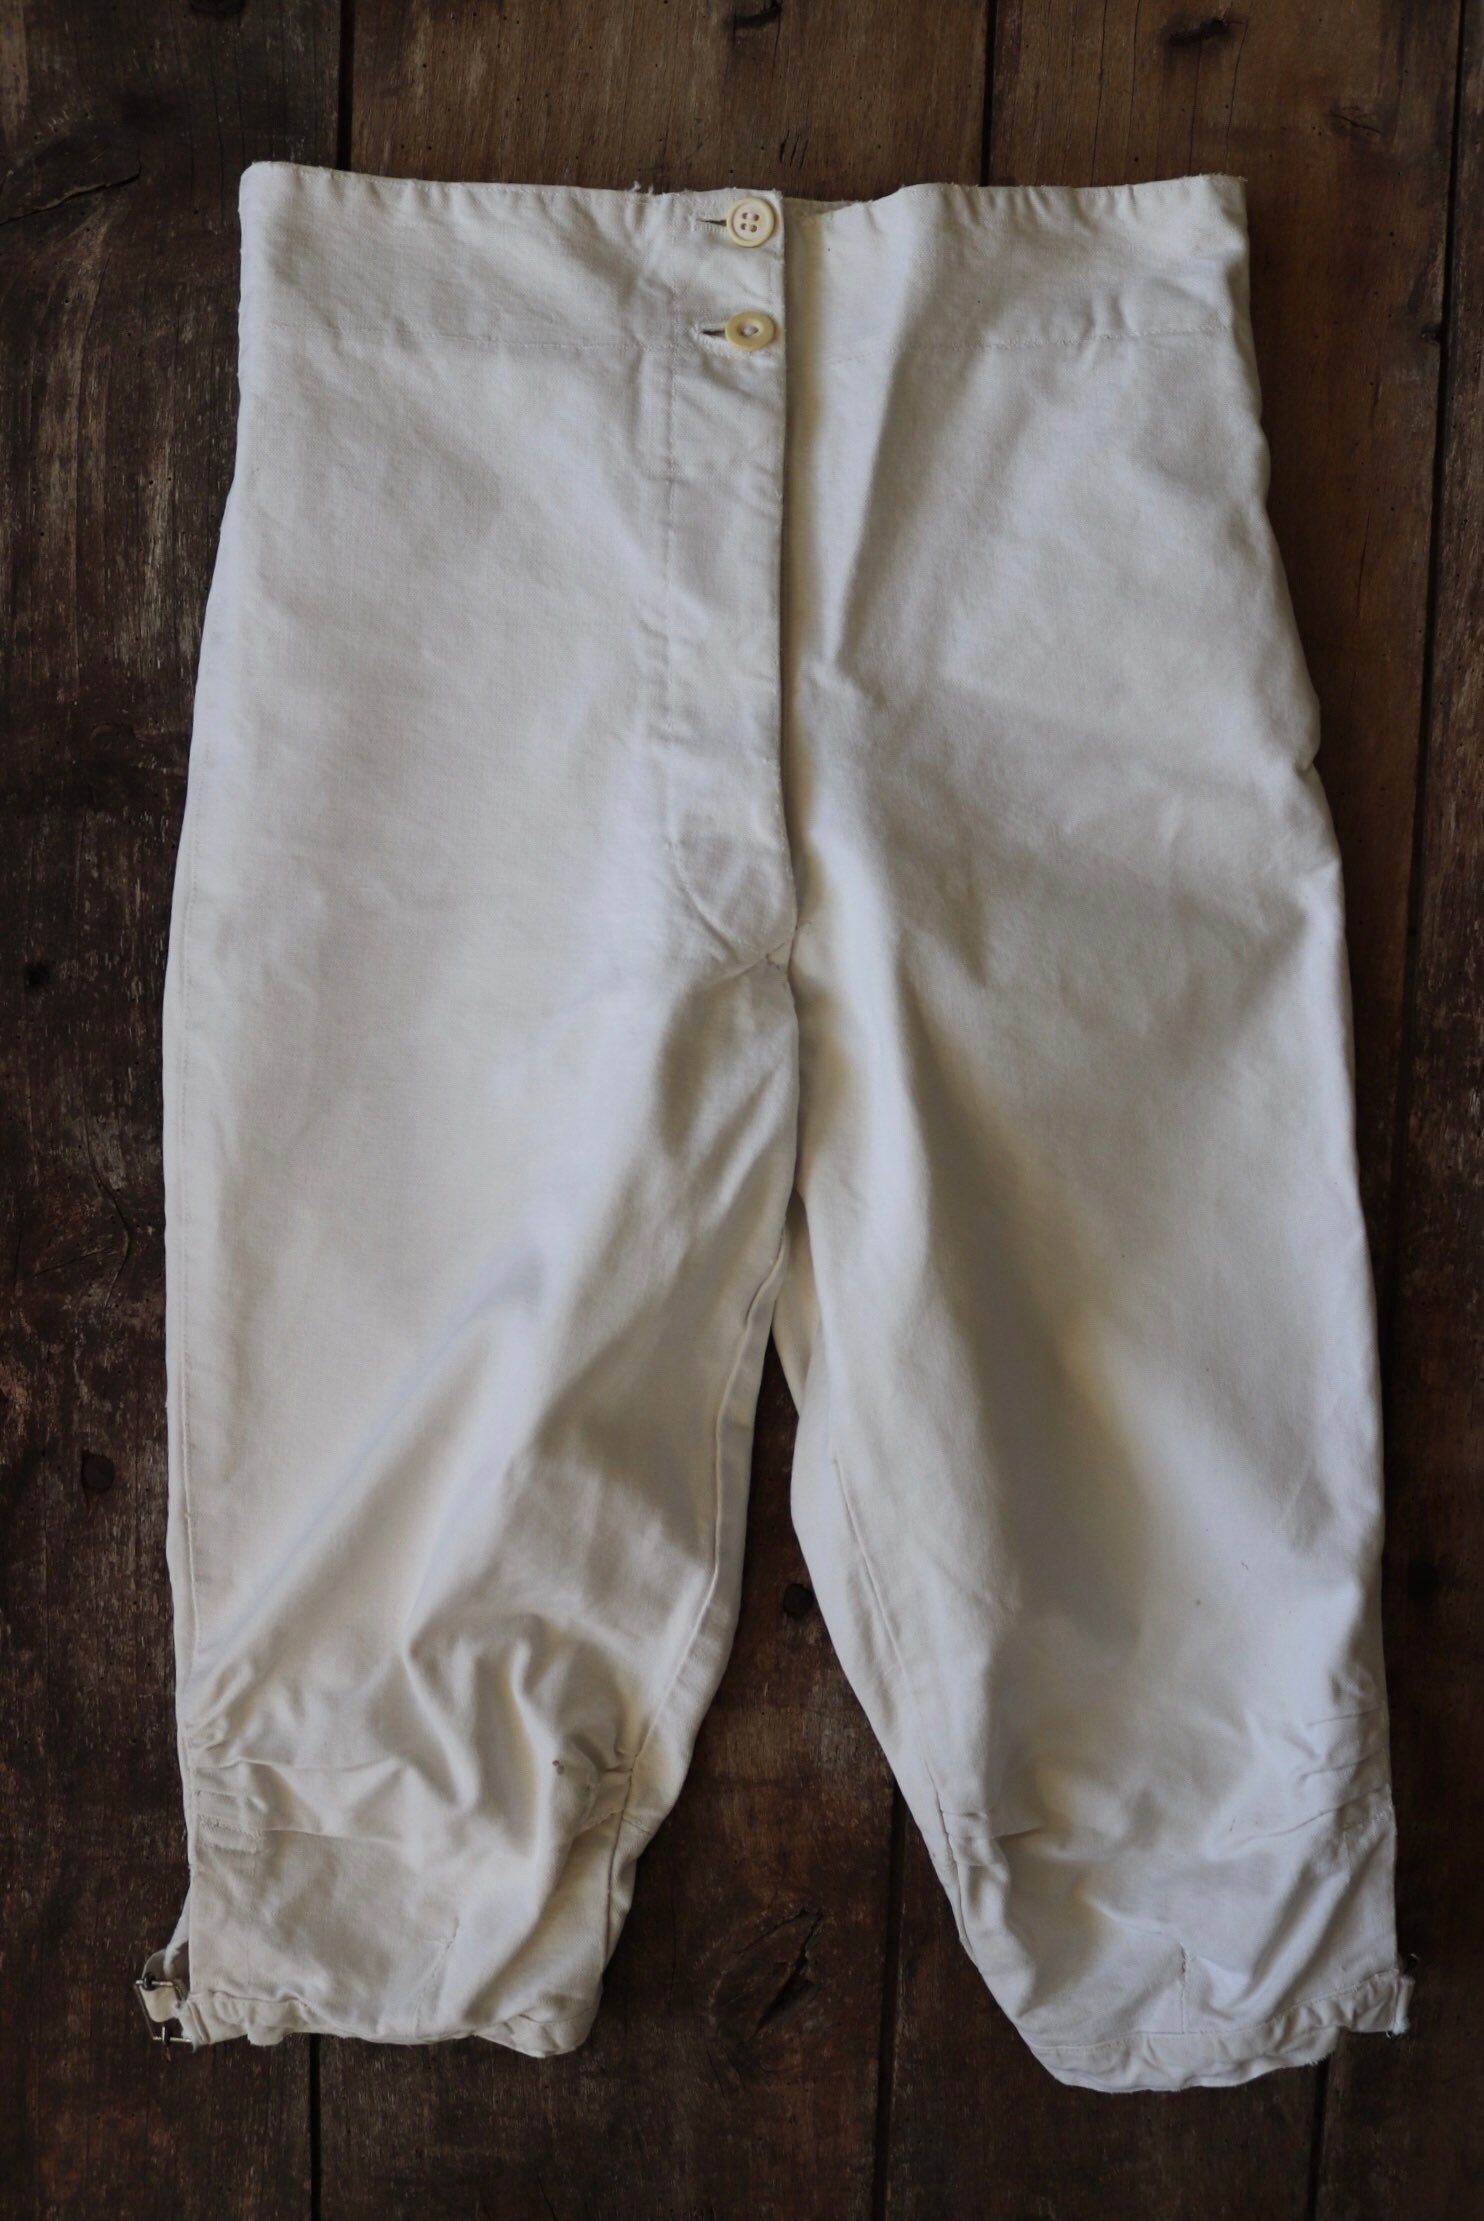 Vintage 1950s 50s French white cotton fencing breeches breeches pants ...